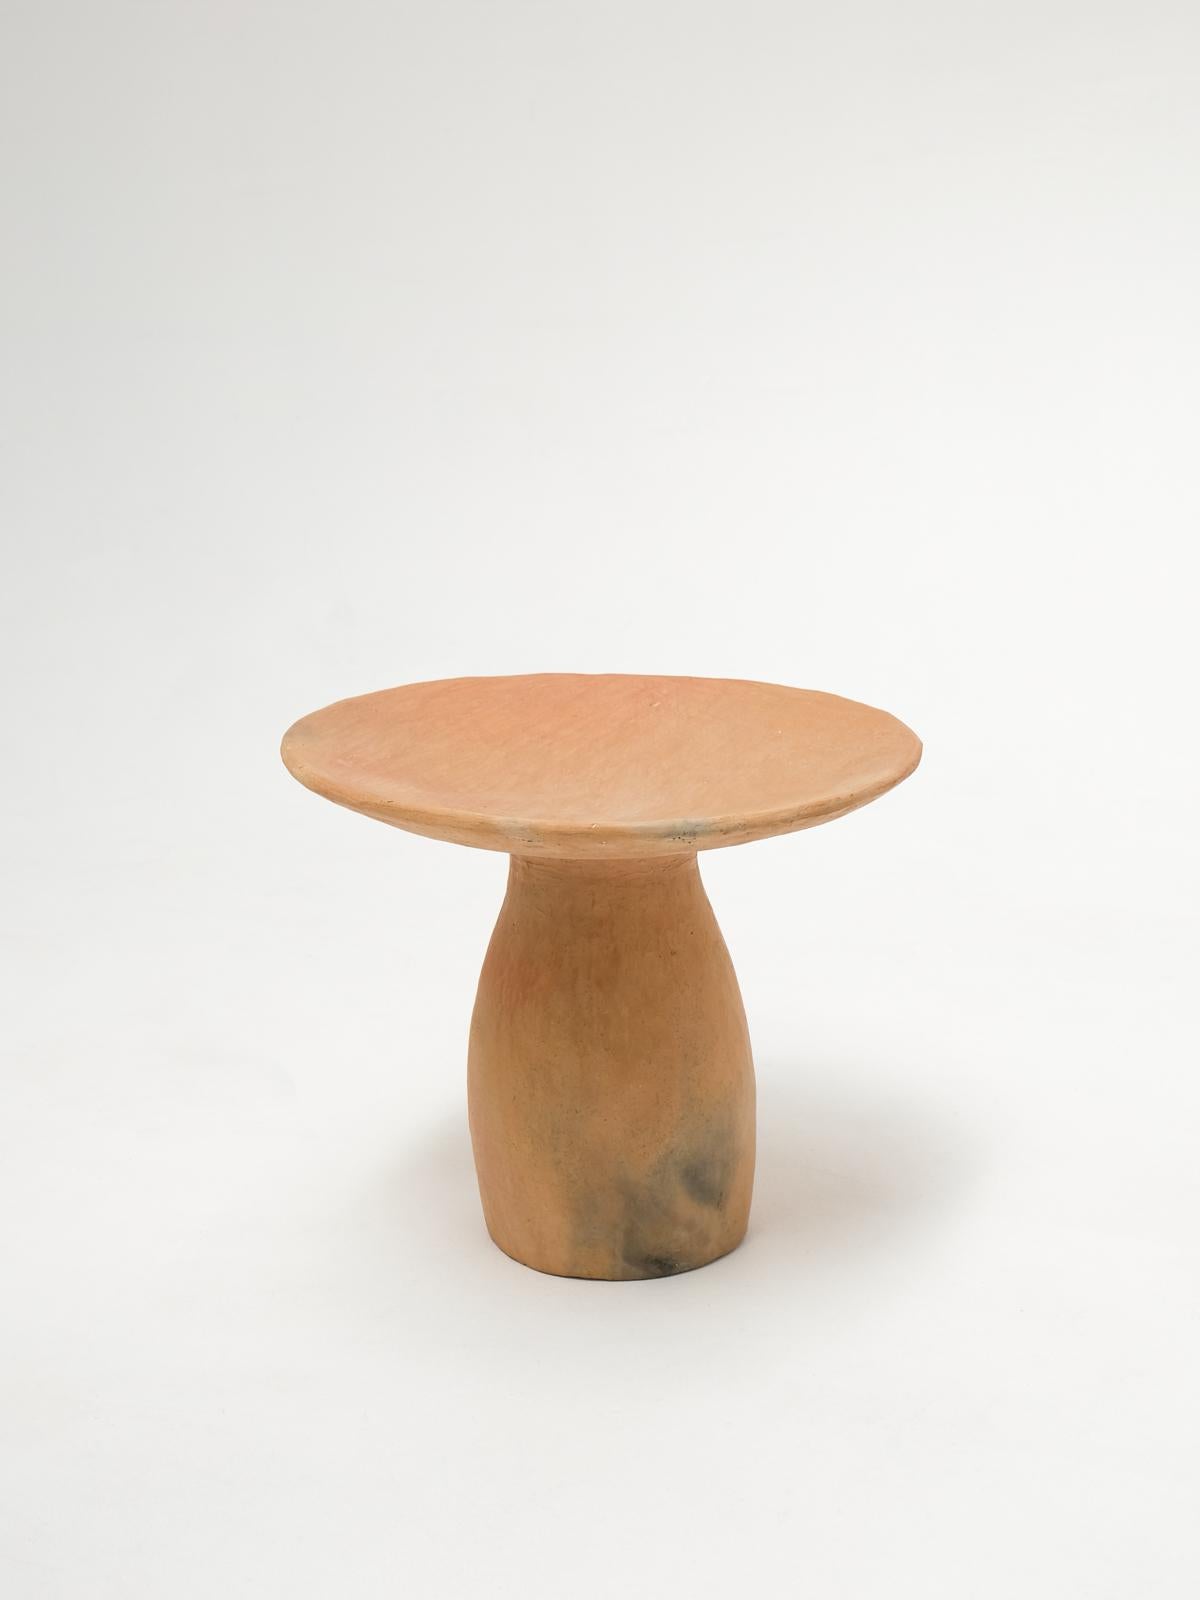 Terracotta contemporary Side Tables Made of local Clay, Handbuilt handfired For Sale 5